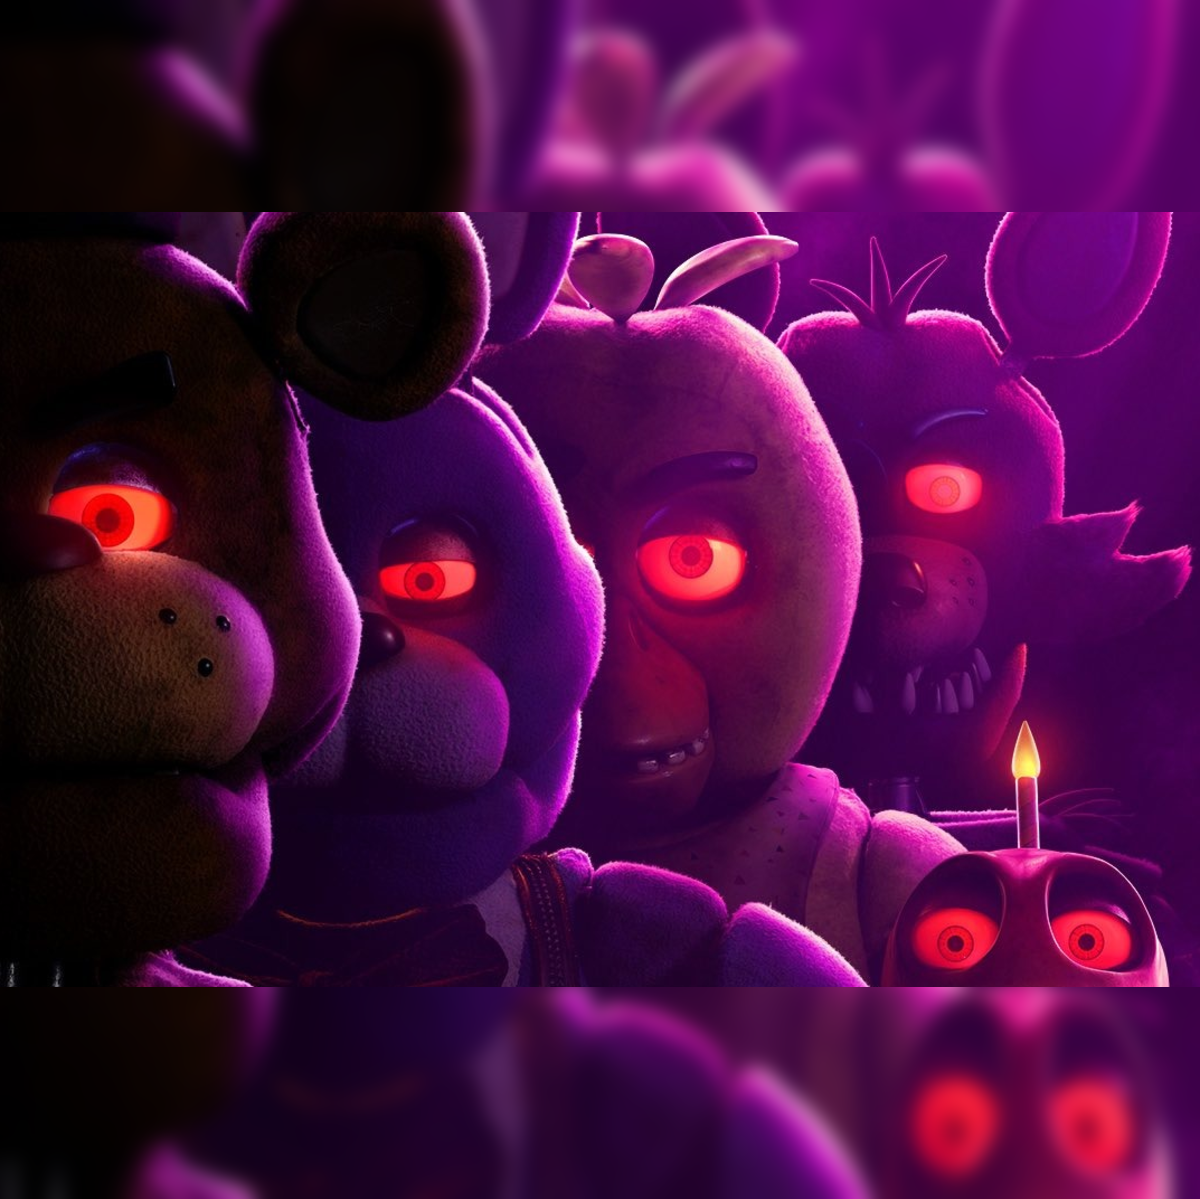 Five Nights at Freddy's': Where to Watch Online and Play Games